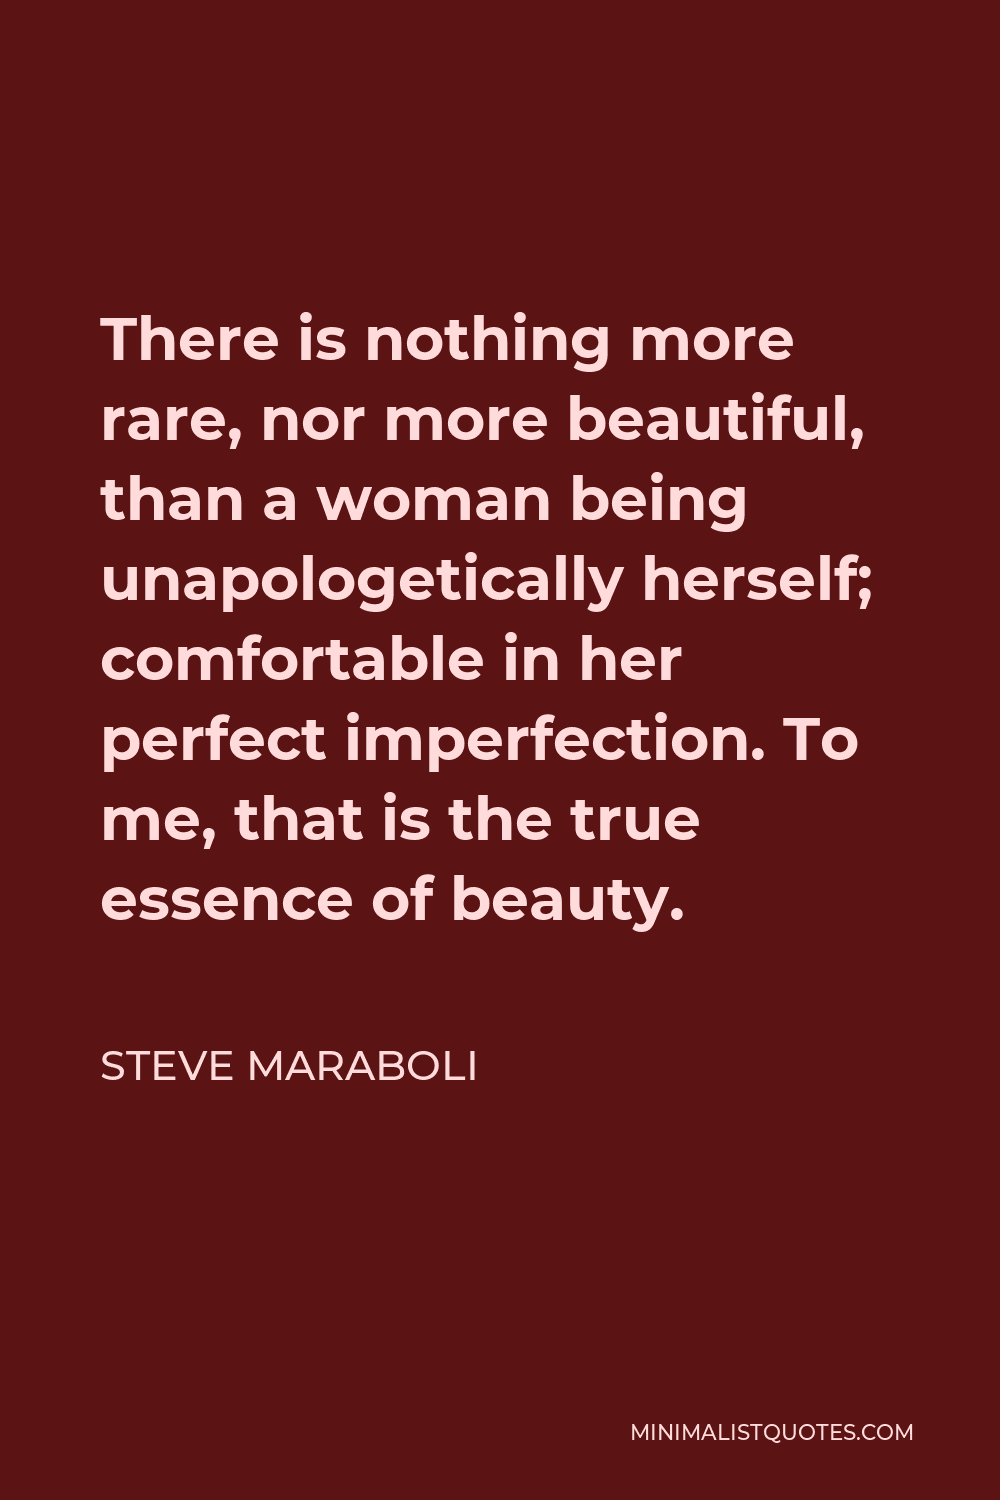 Steve Maraboli Quote - There is nothing more rare, nor more beautiful, than a woman being unapologetically herself; comfortable in her perfect imperfection. To me, that is the true essence of beauty.